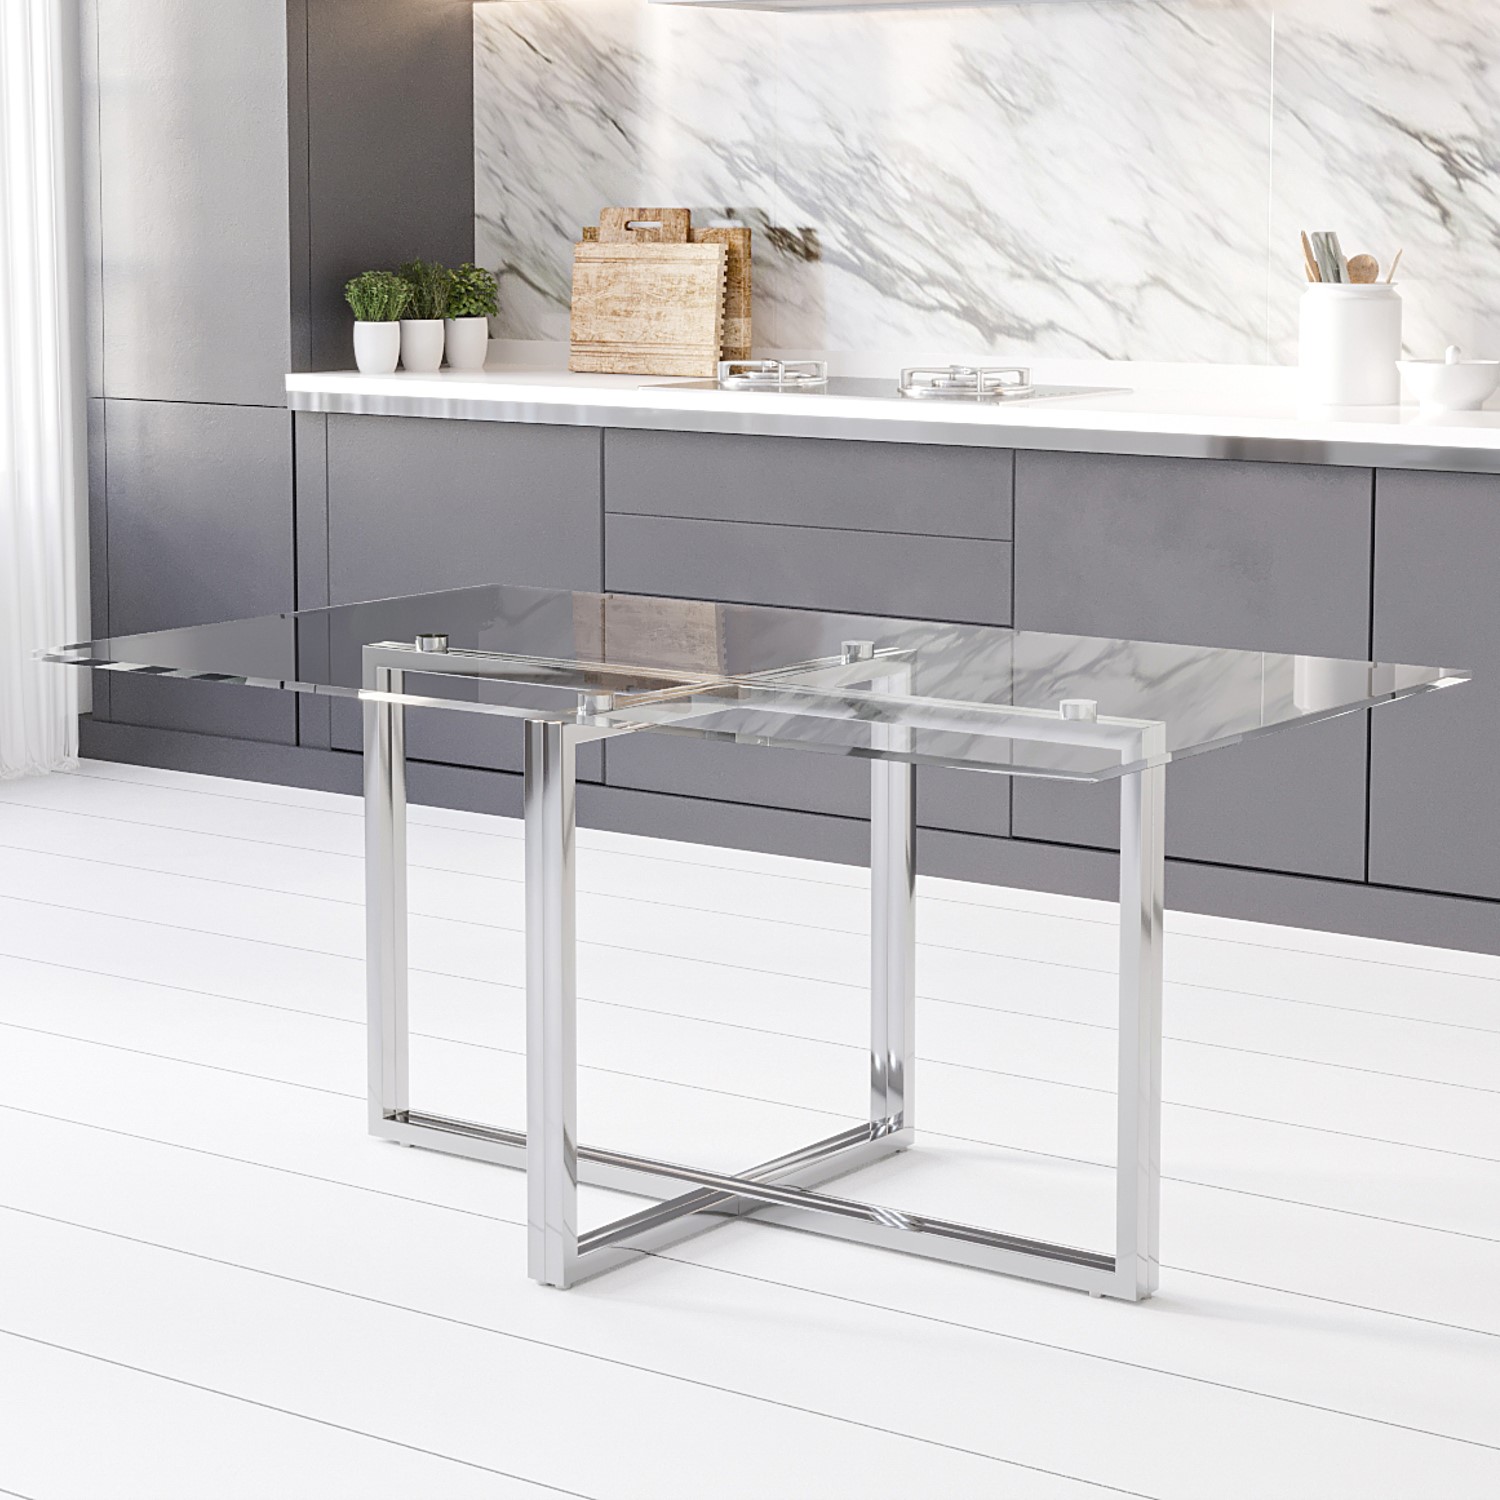 Photo of Rectangle glass top dining table - seats 6 - alana boutique